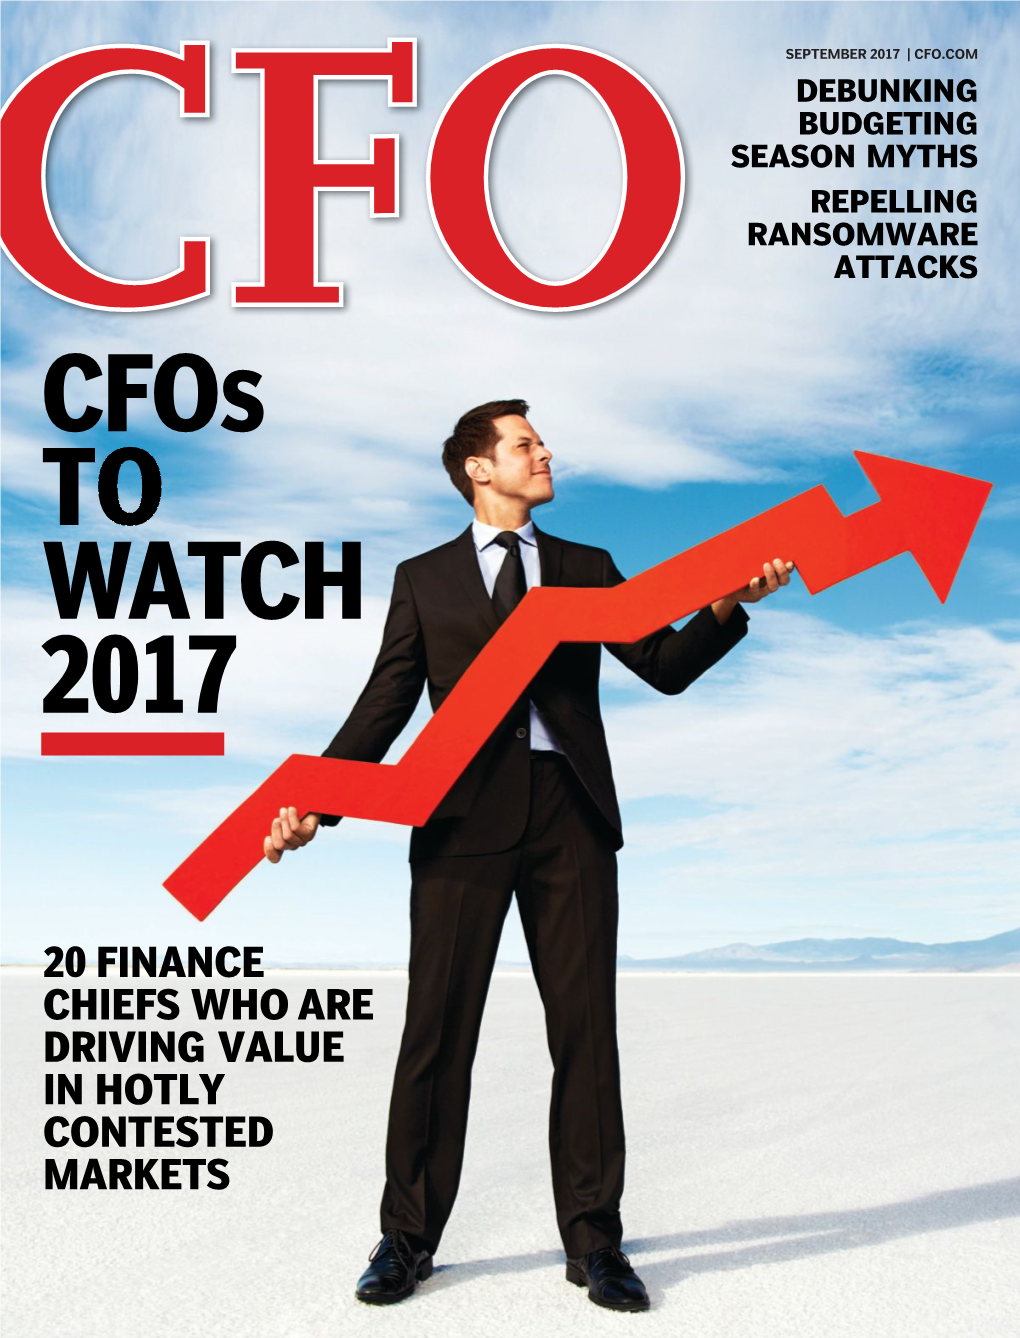 Cfos to WATCH 2017